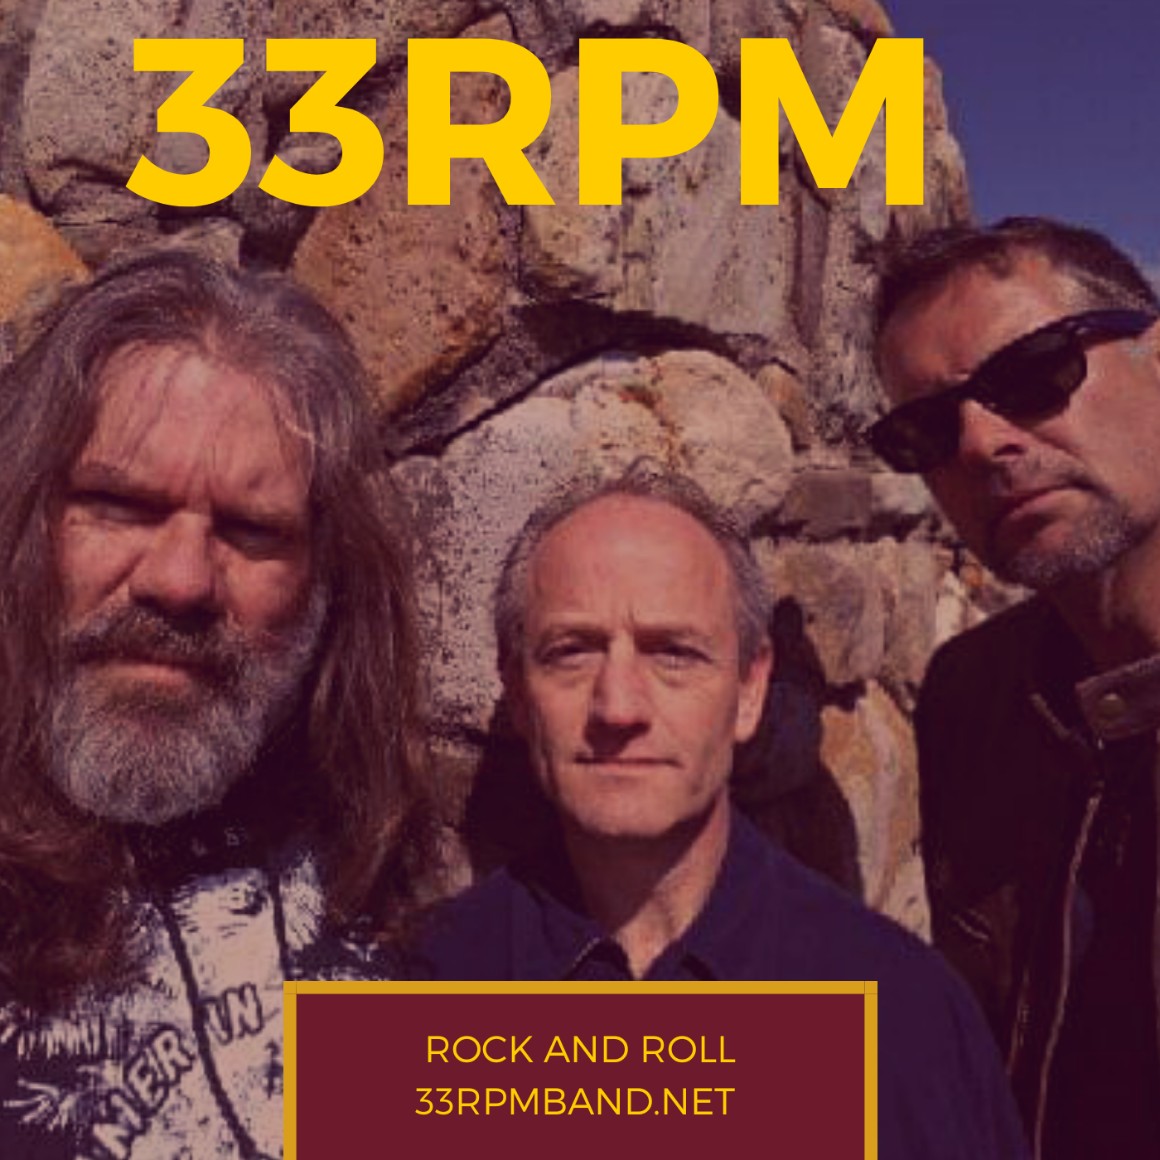 33RPM March 23rd at Bourbon Street on the Beach